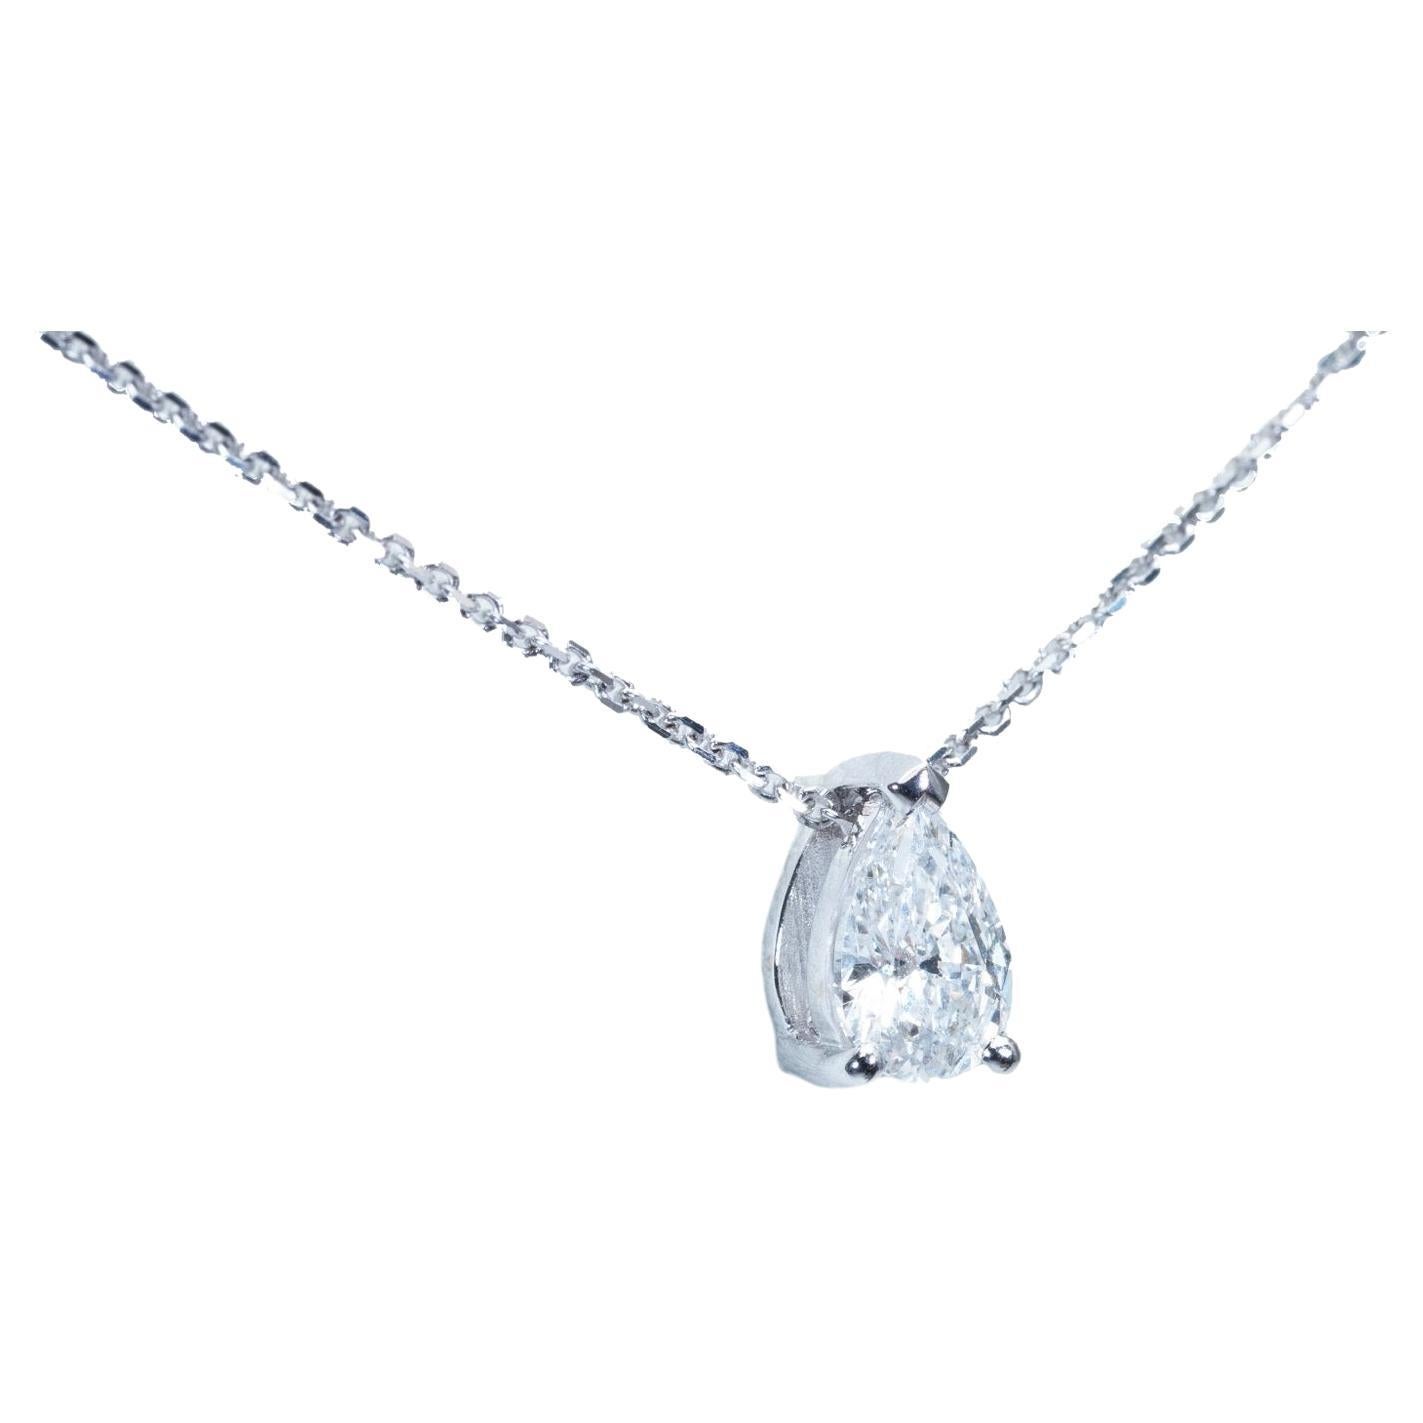 Beautiful 18K White Gold Necklace with 0.39 Ct Natural Diamond, GIA Certificate